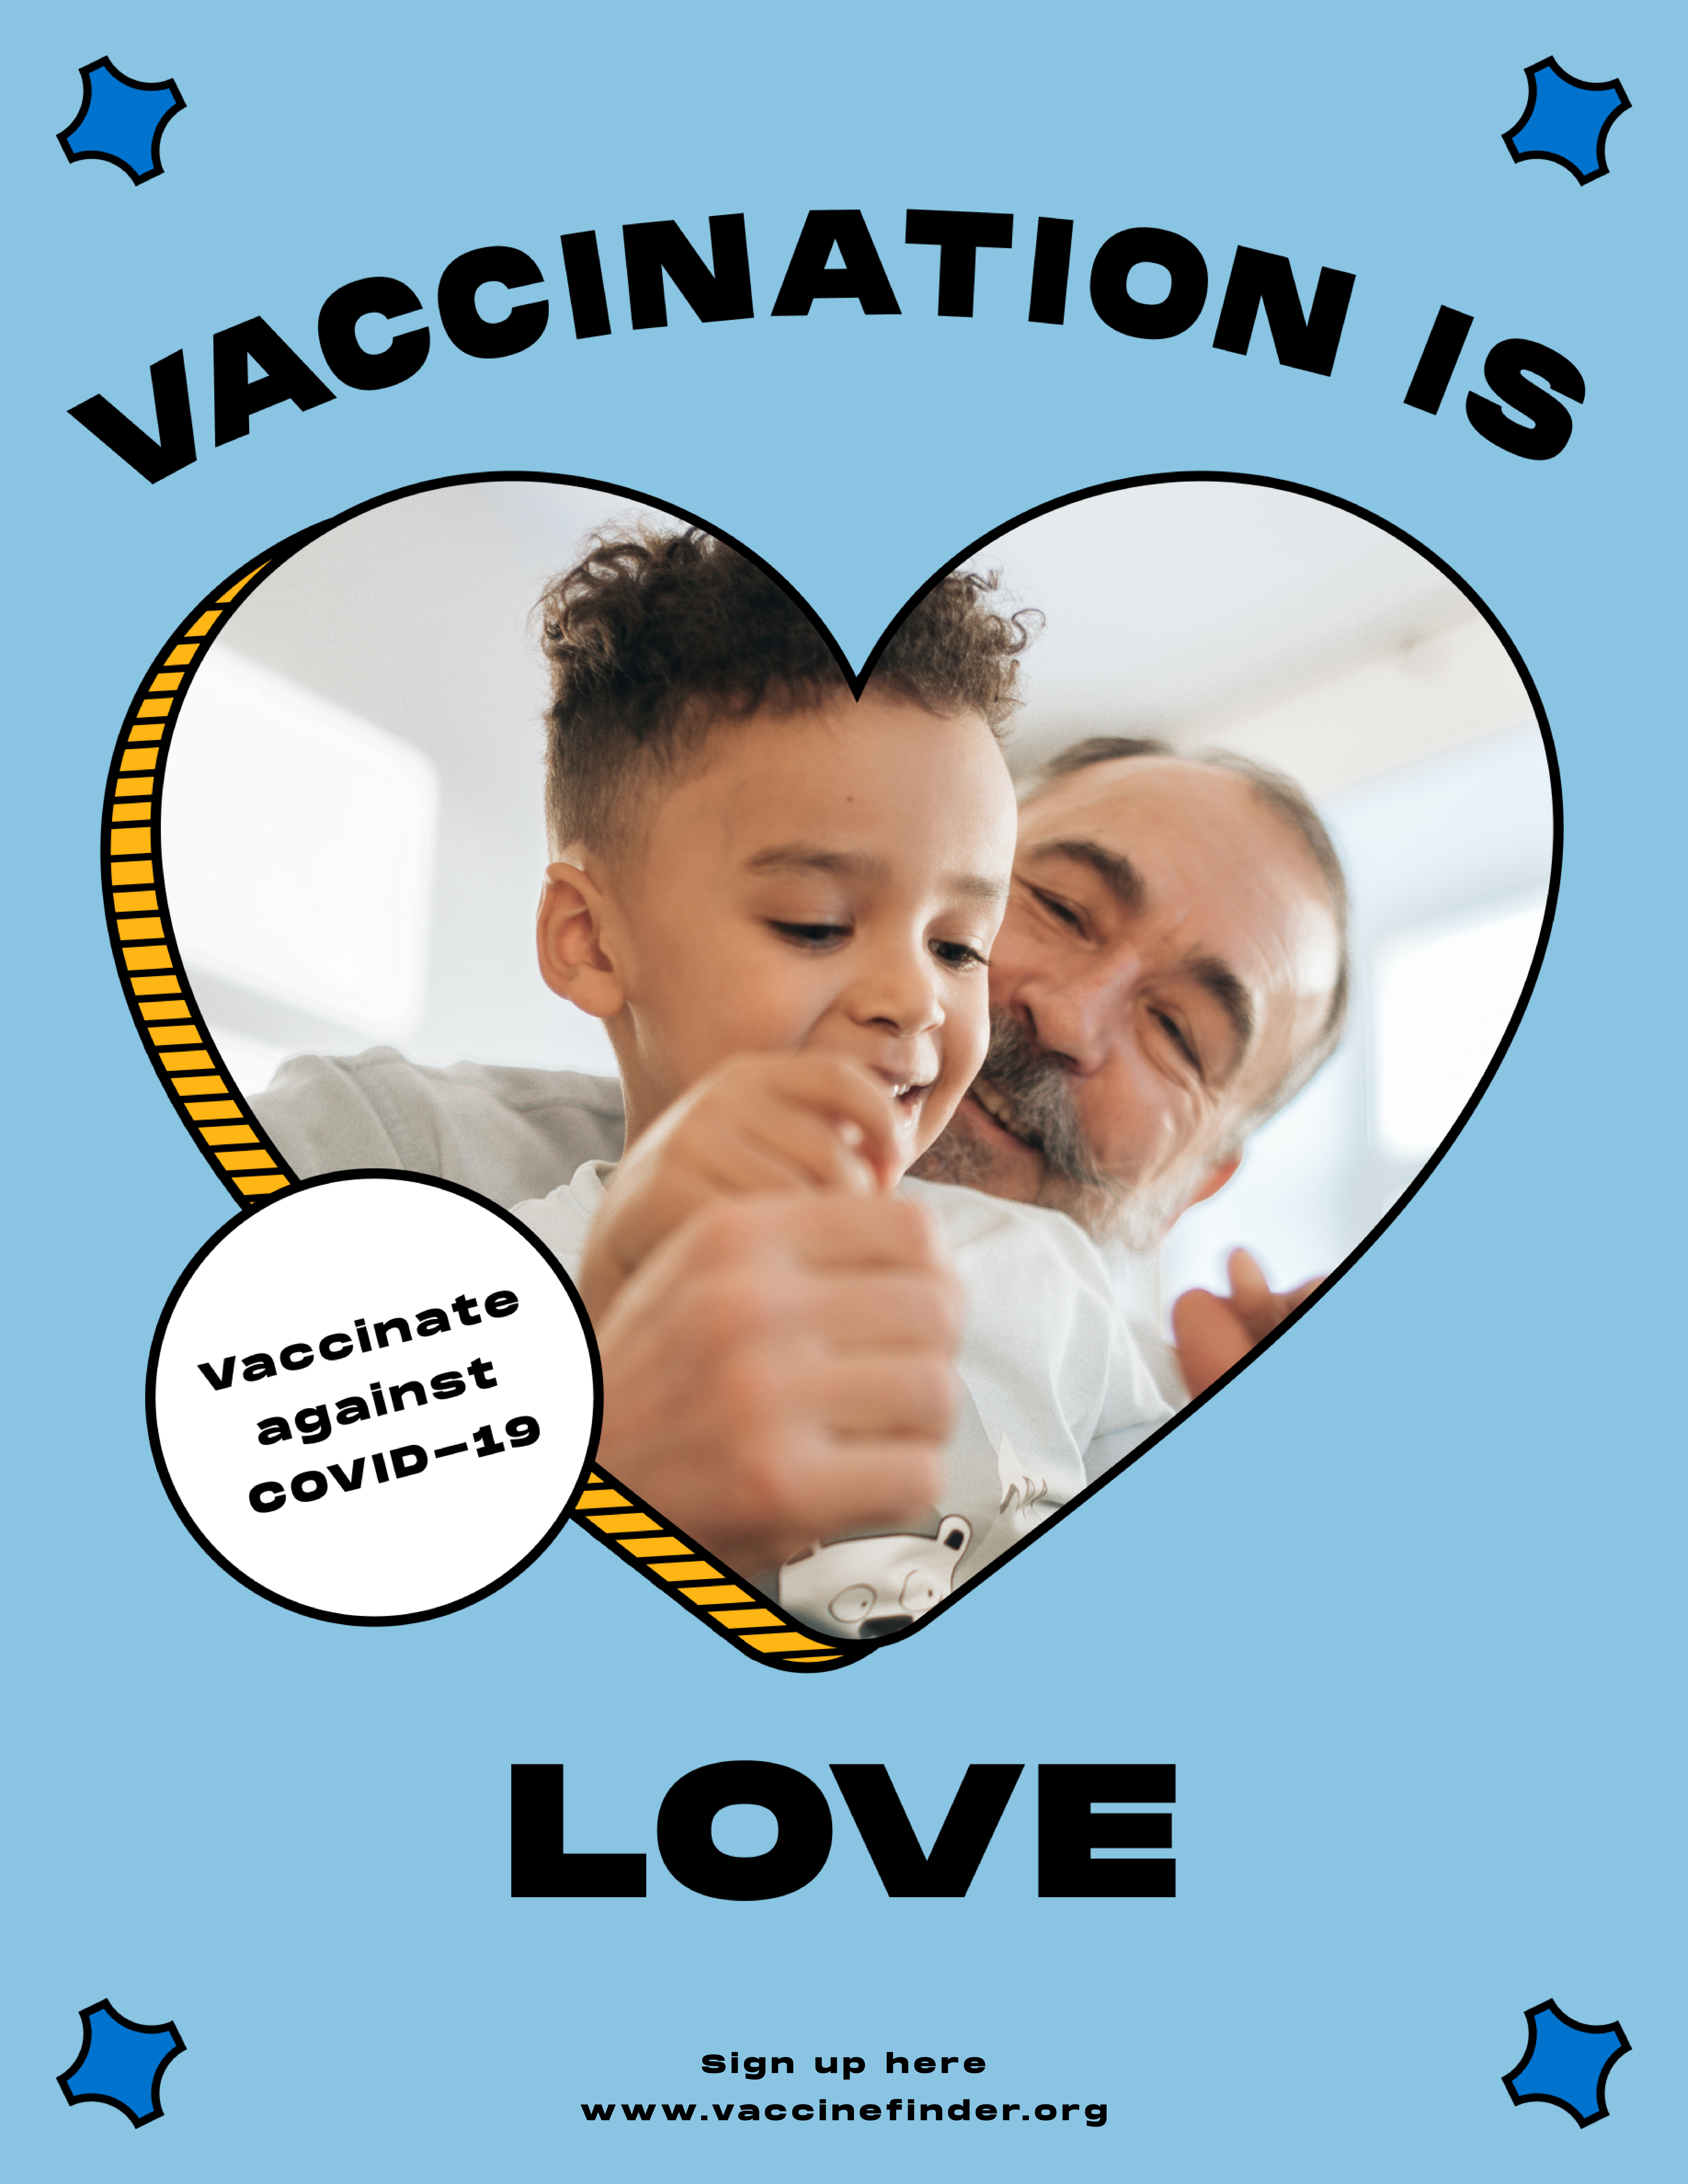 a man and young boy surrounded by the words "Vaccination is love"